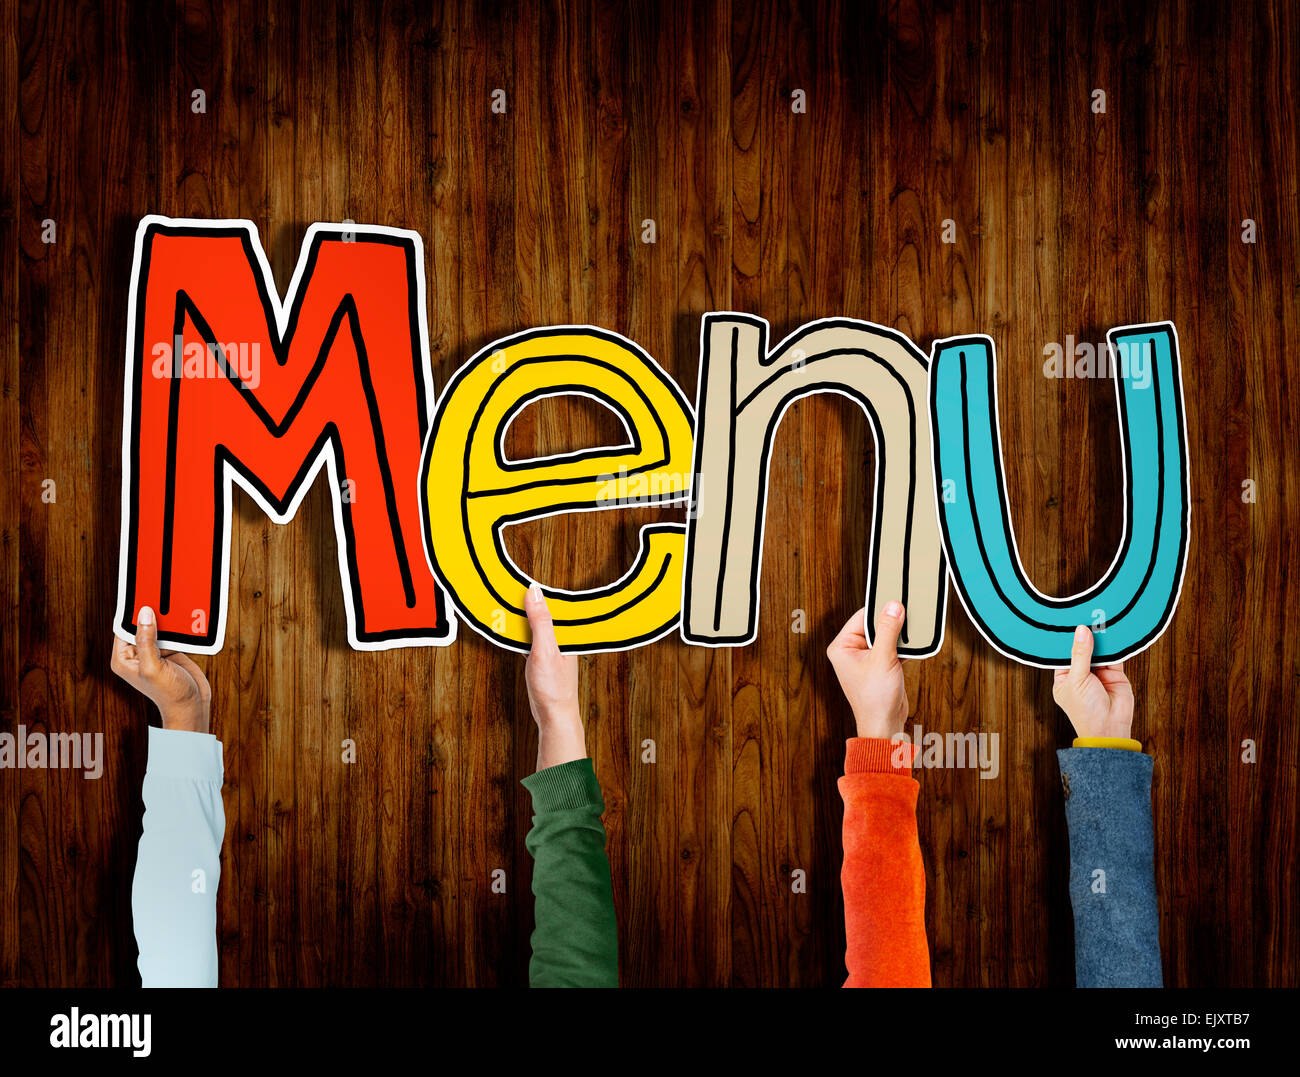 Hands Holding Menu Word Concept Stock Photo